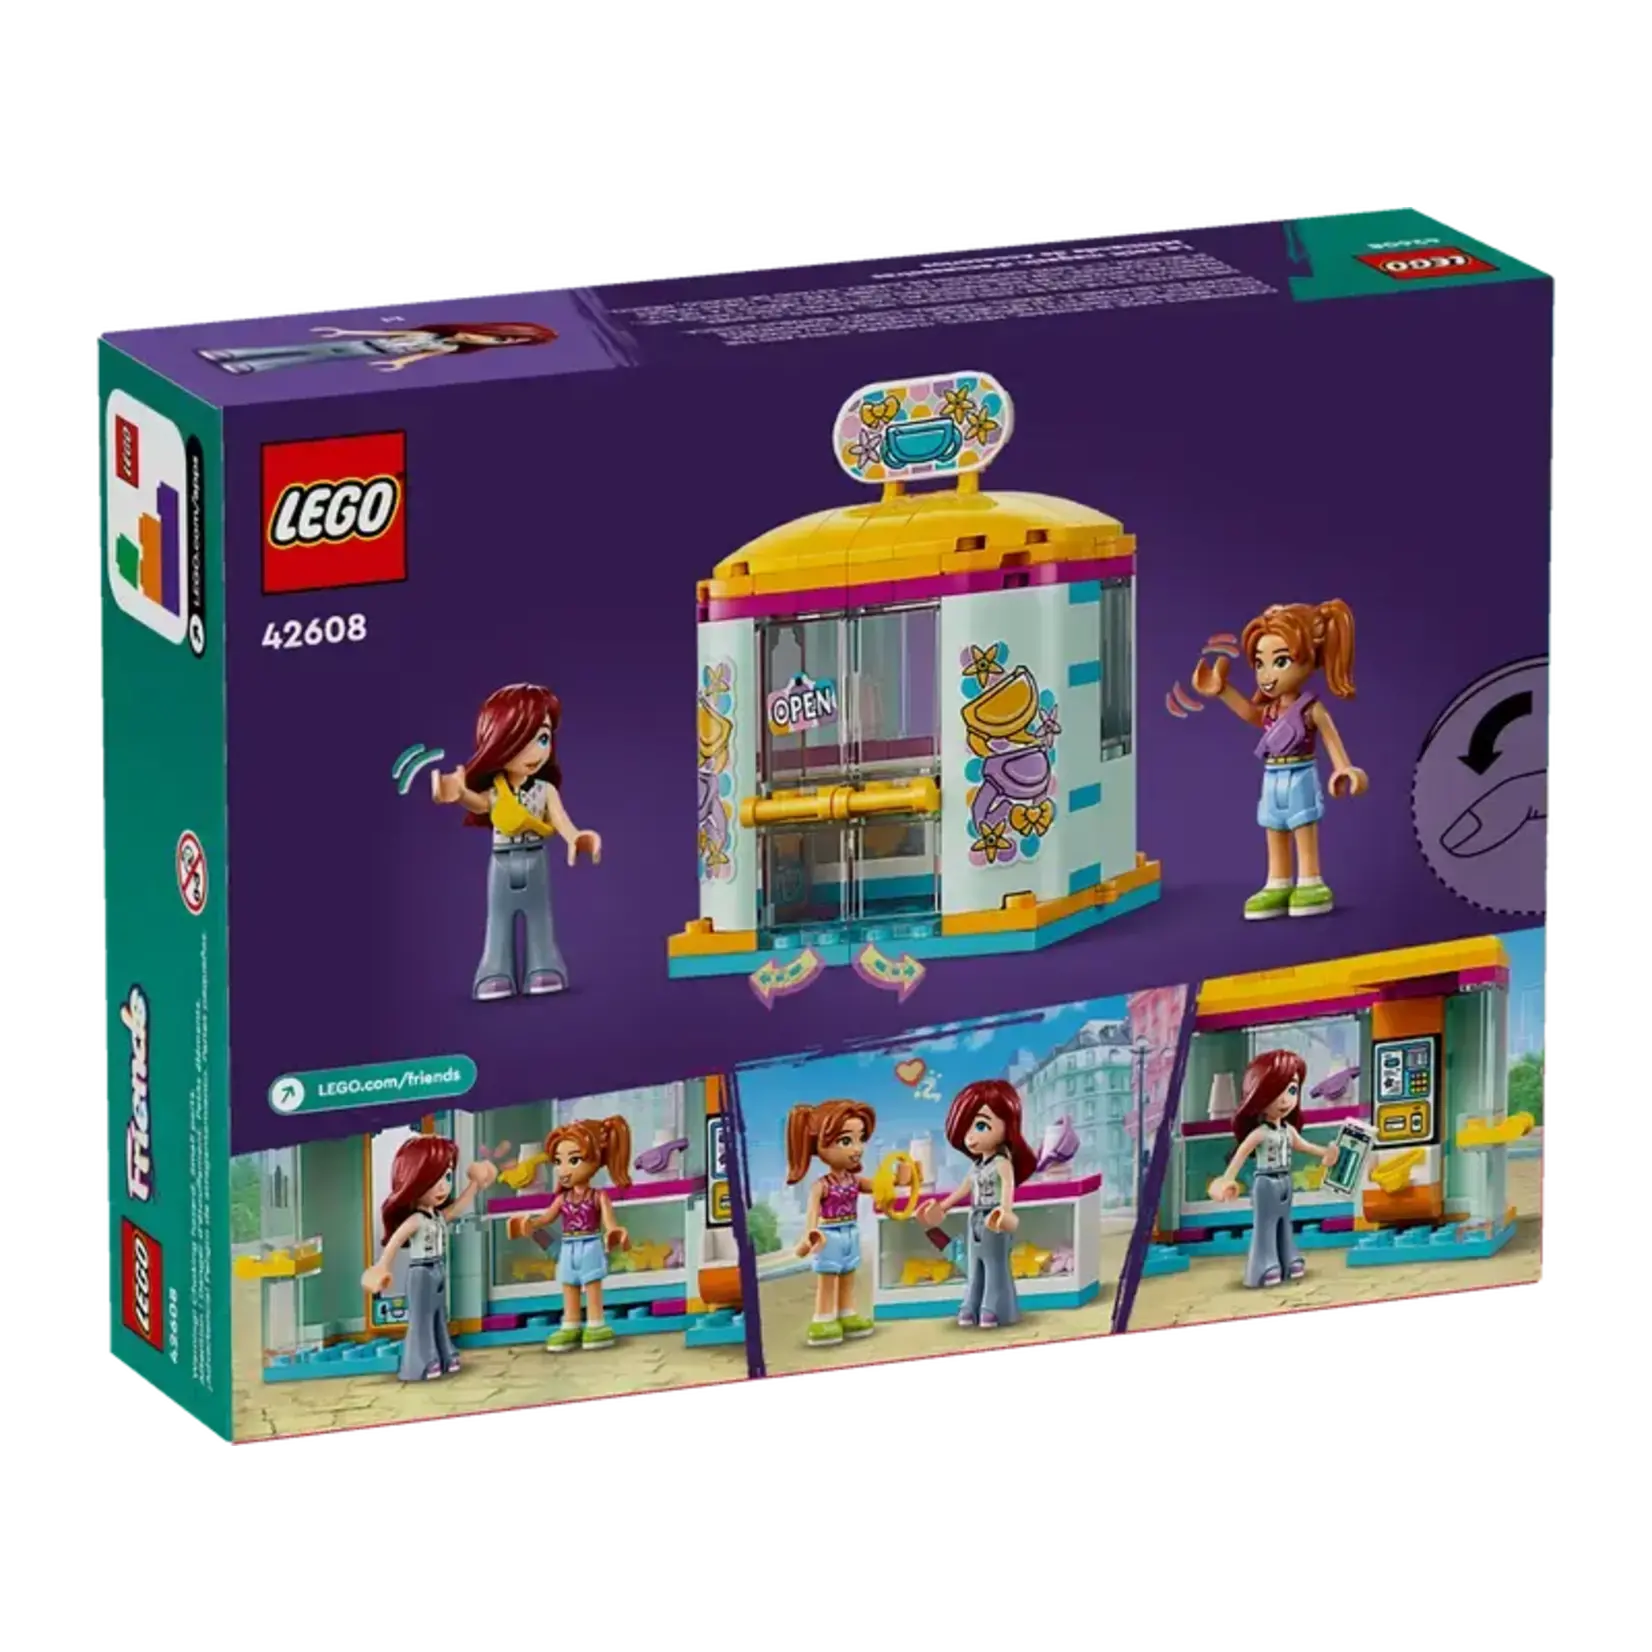 Lego Friends Tiny Accessories Store